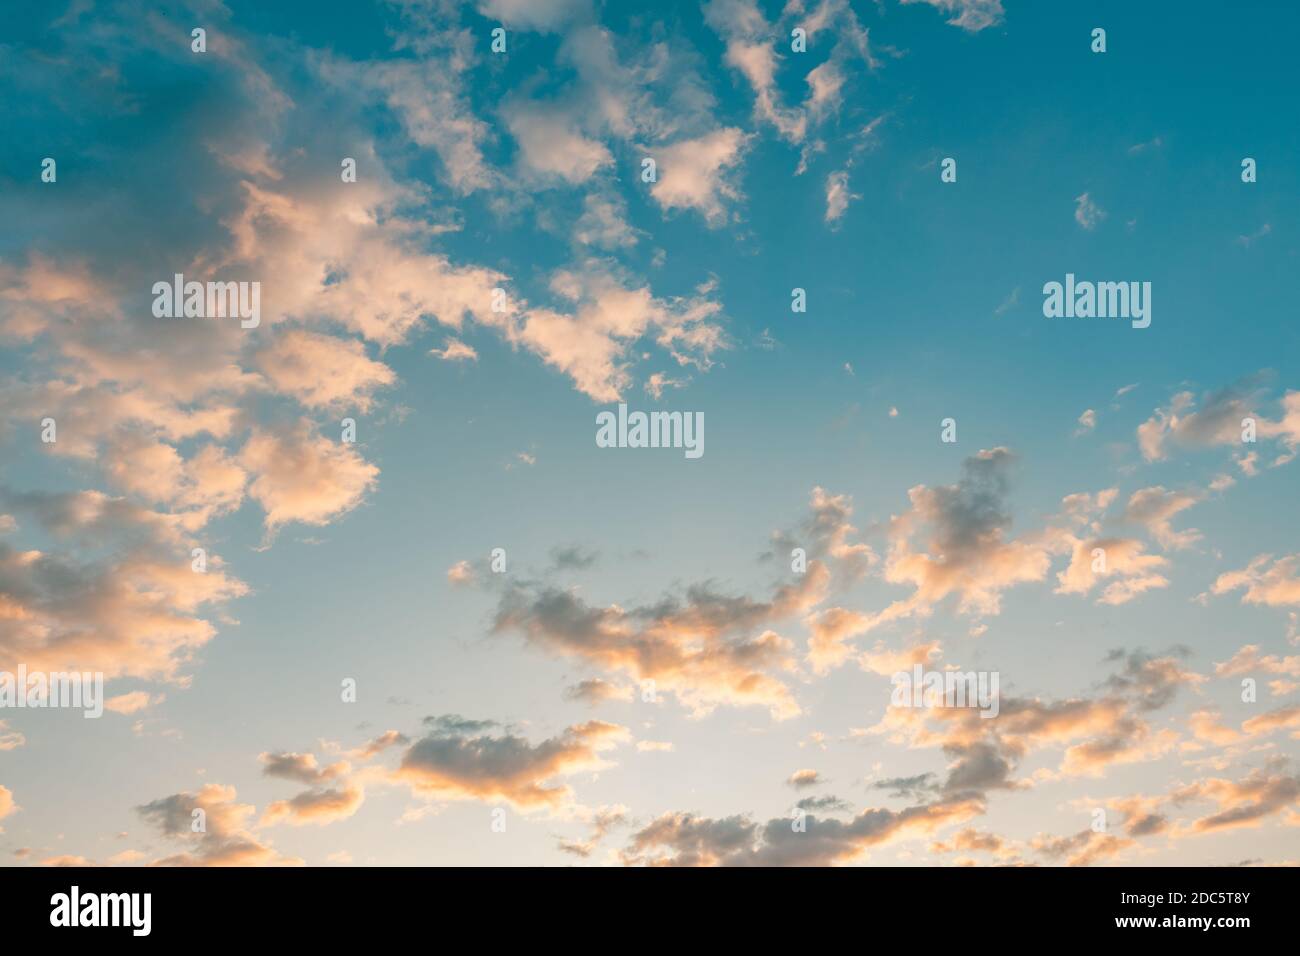 Sky with clouds and sun. Romantic skyscape, summer sky clouds, sunset colors. Dream weather, positive vibes, meditation Stock Photo